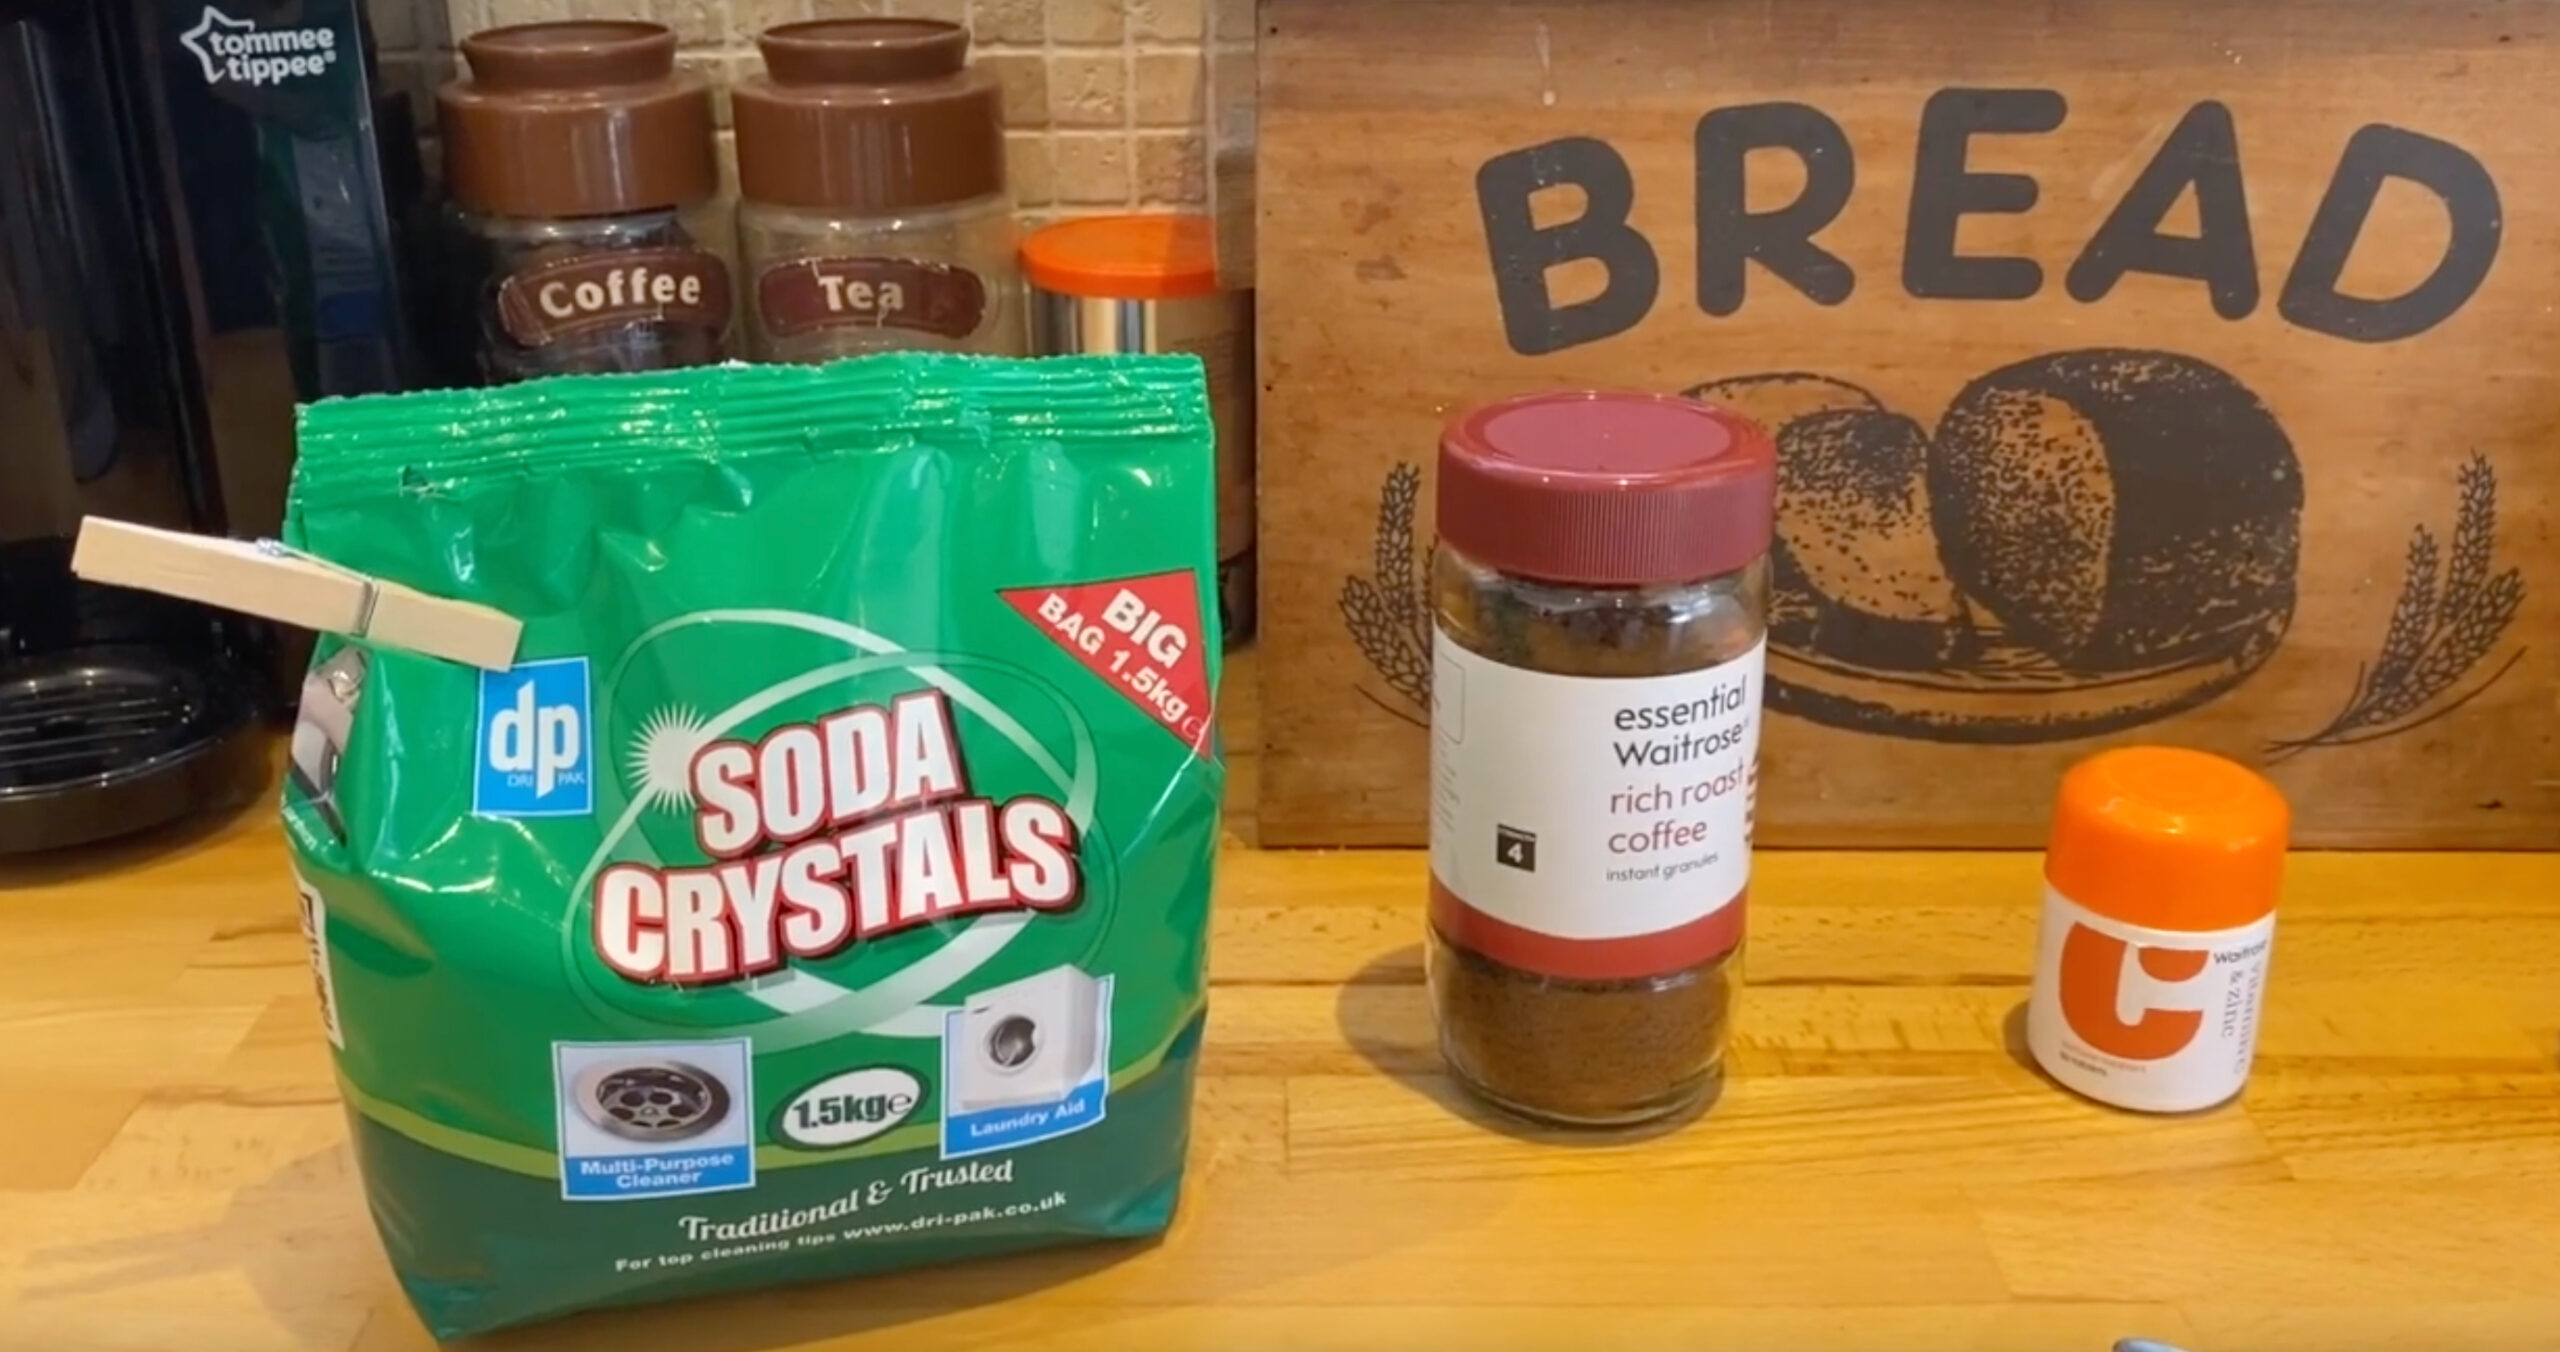 Make your own film developing chemicals from household items